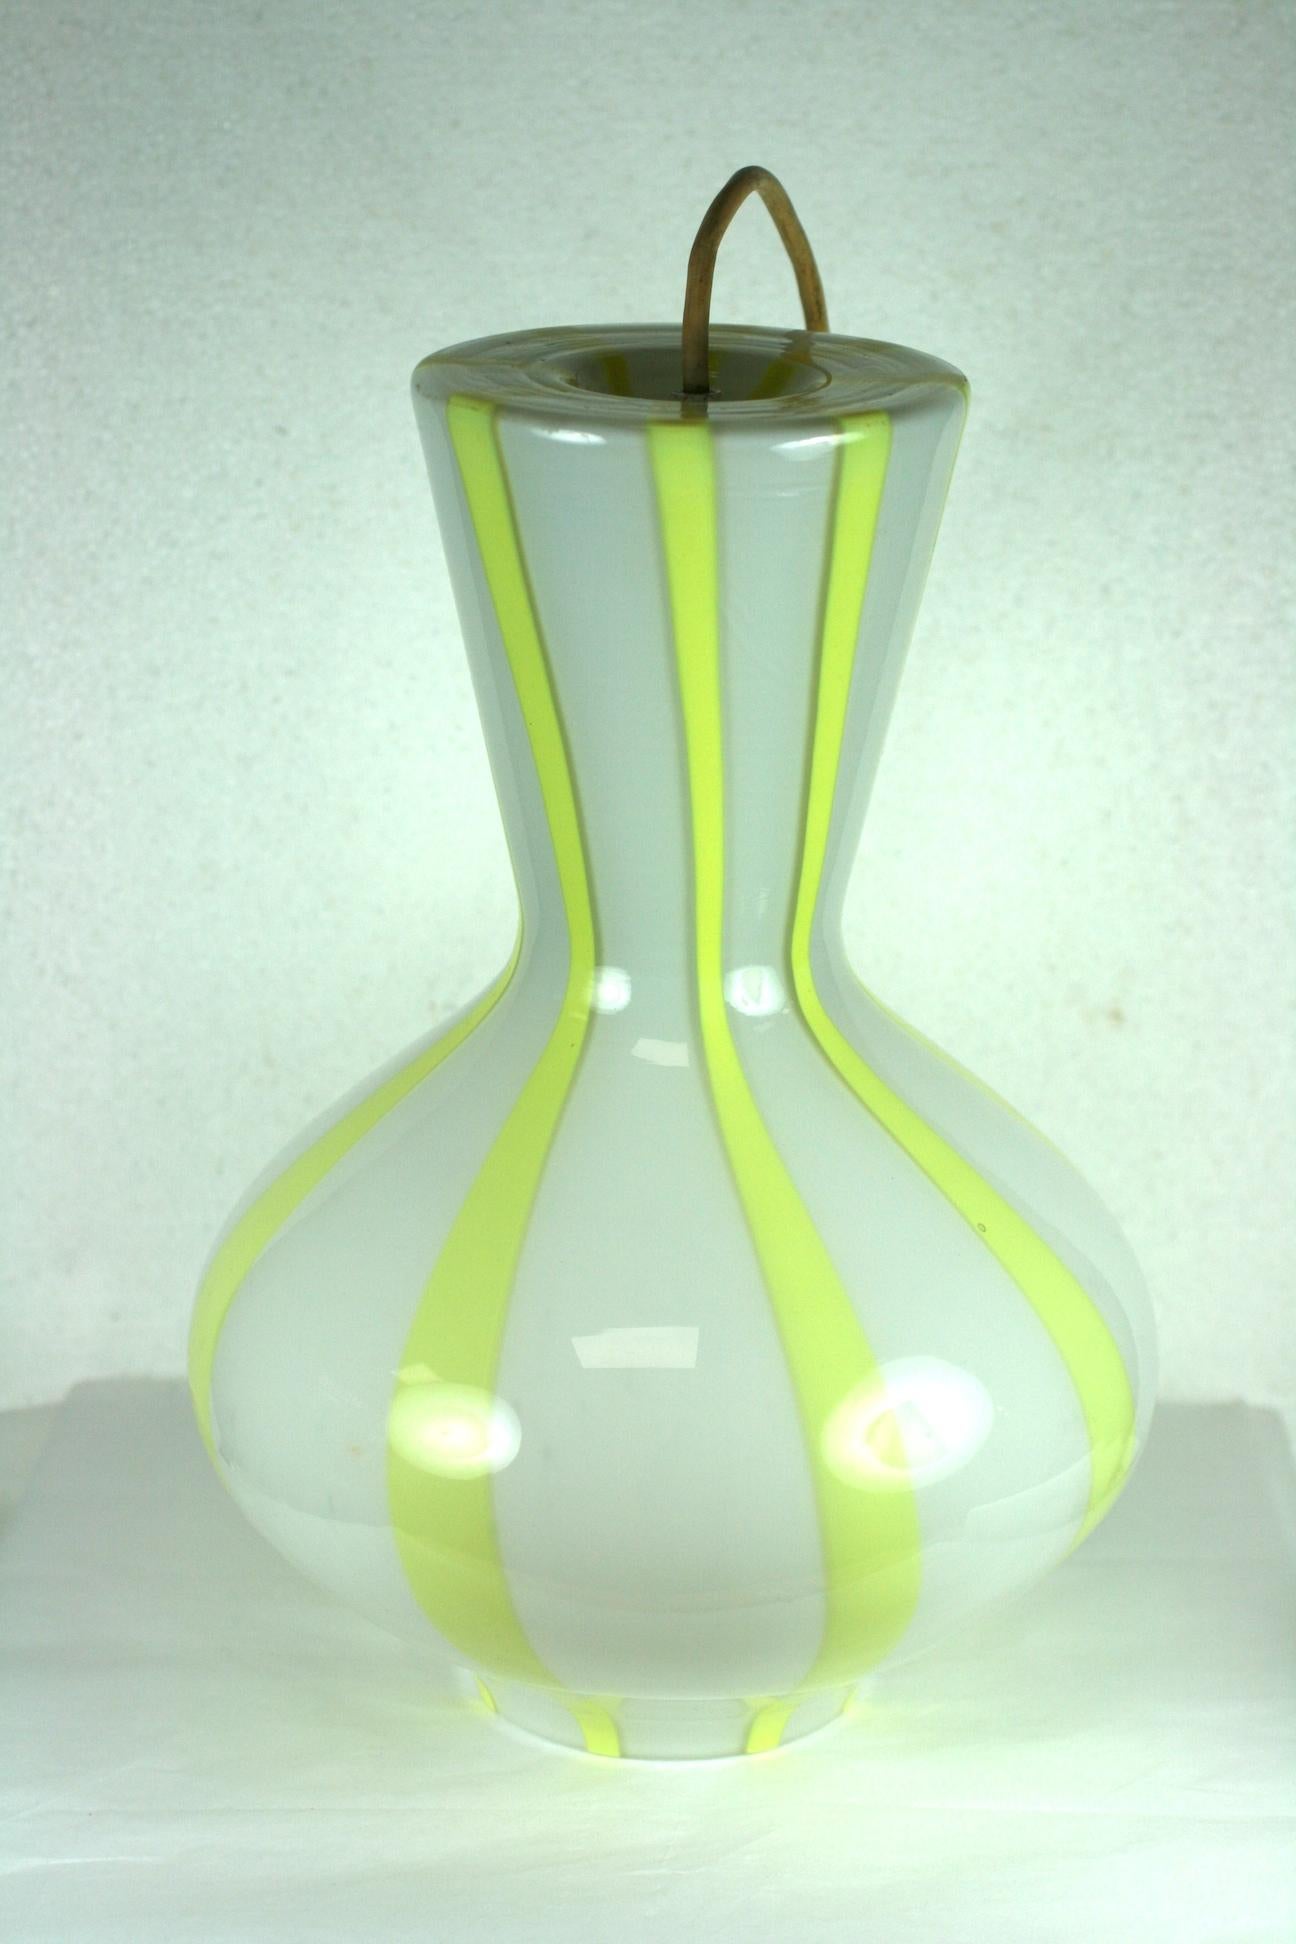 Attractive Venini Italian Glass Fixture in milk and chrome yellow vertical stripes. 
Excellent condition. 1960's Italy.
13.5